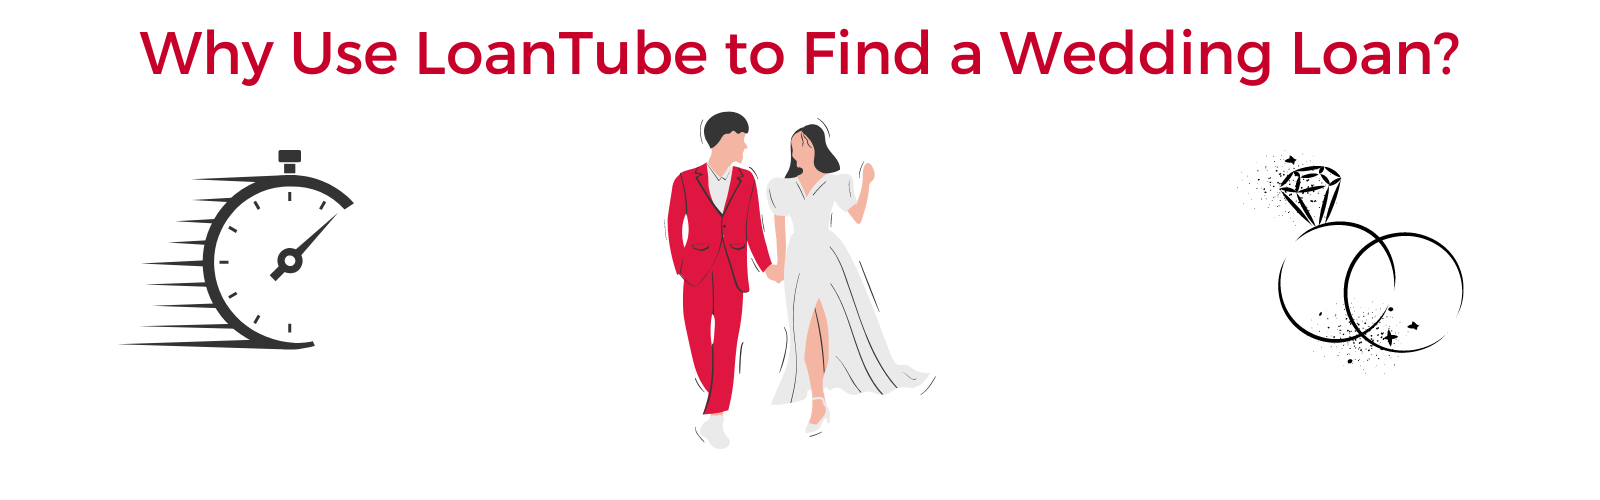 Why Use LoanTube to Get a Wedding Loan?